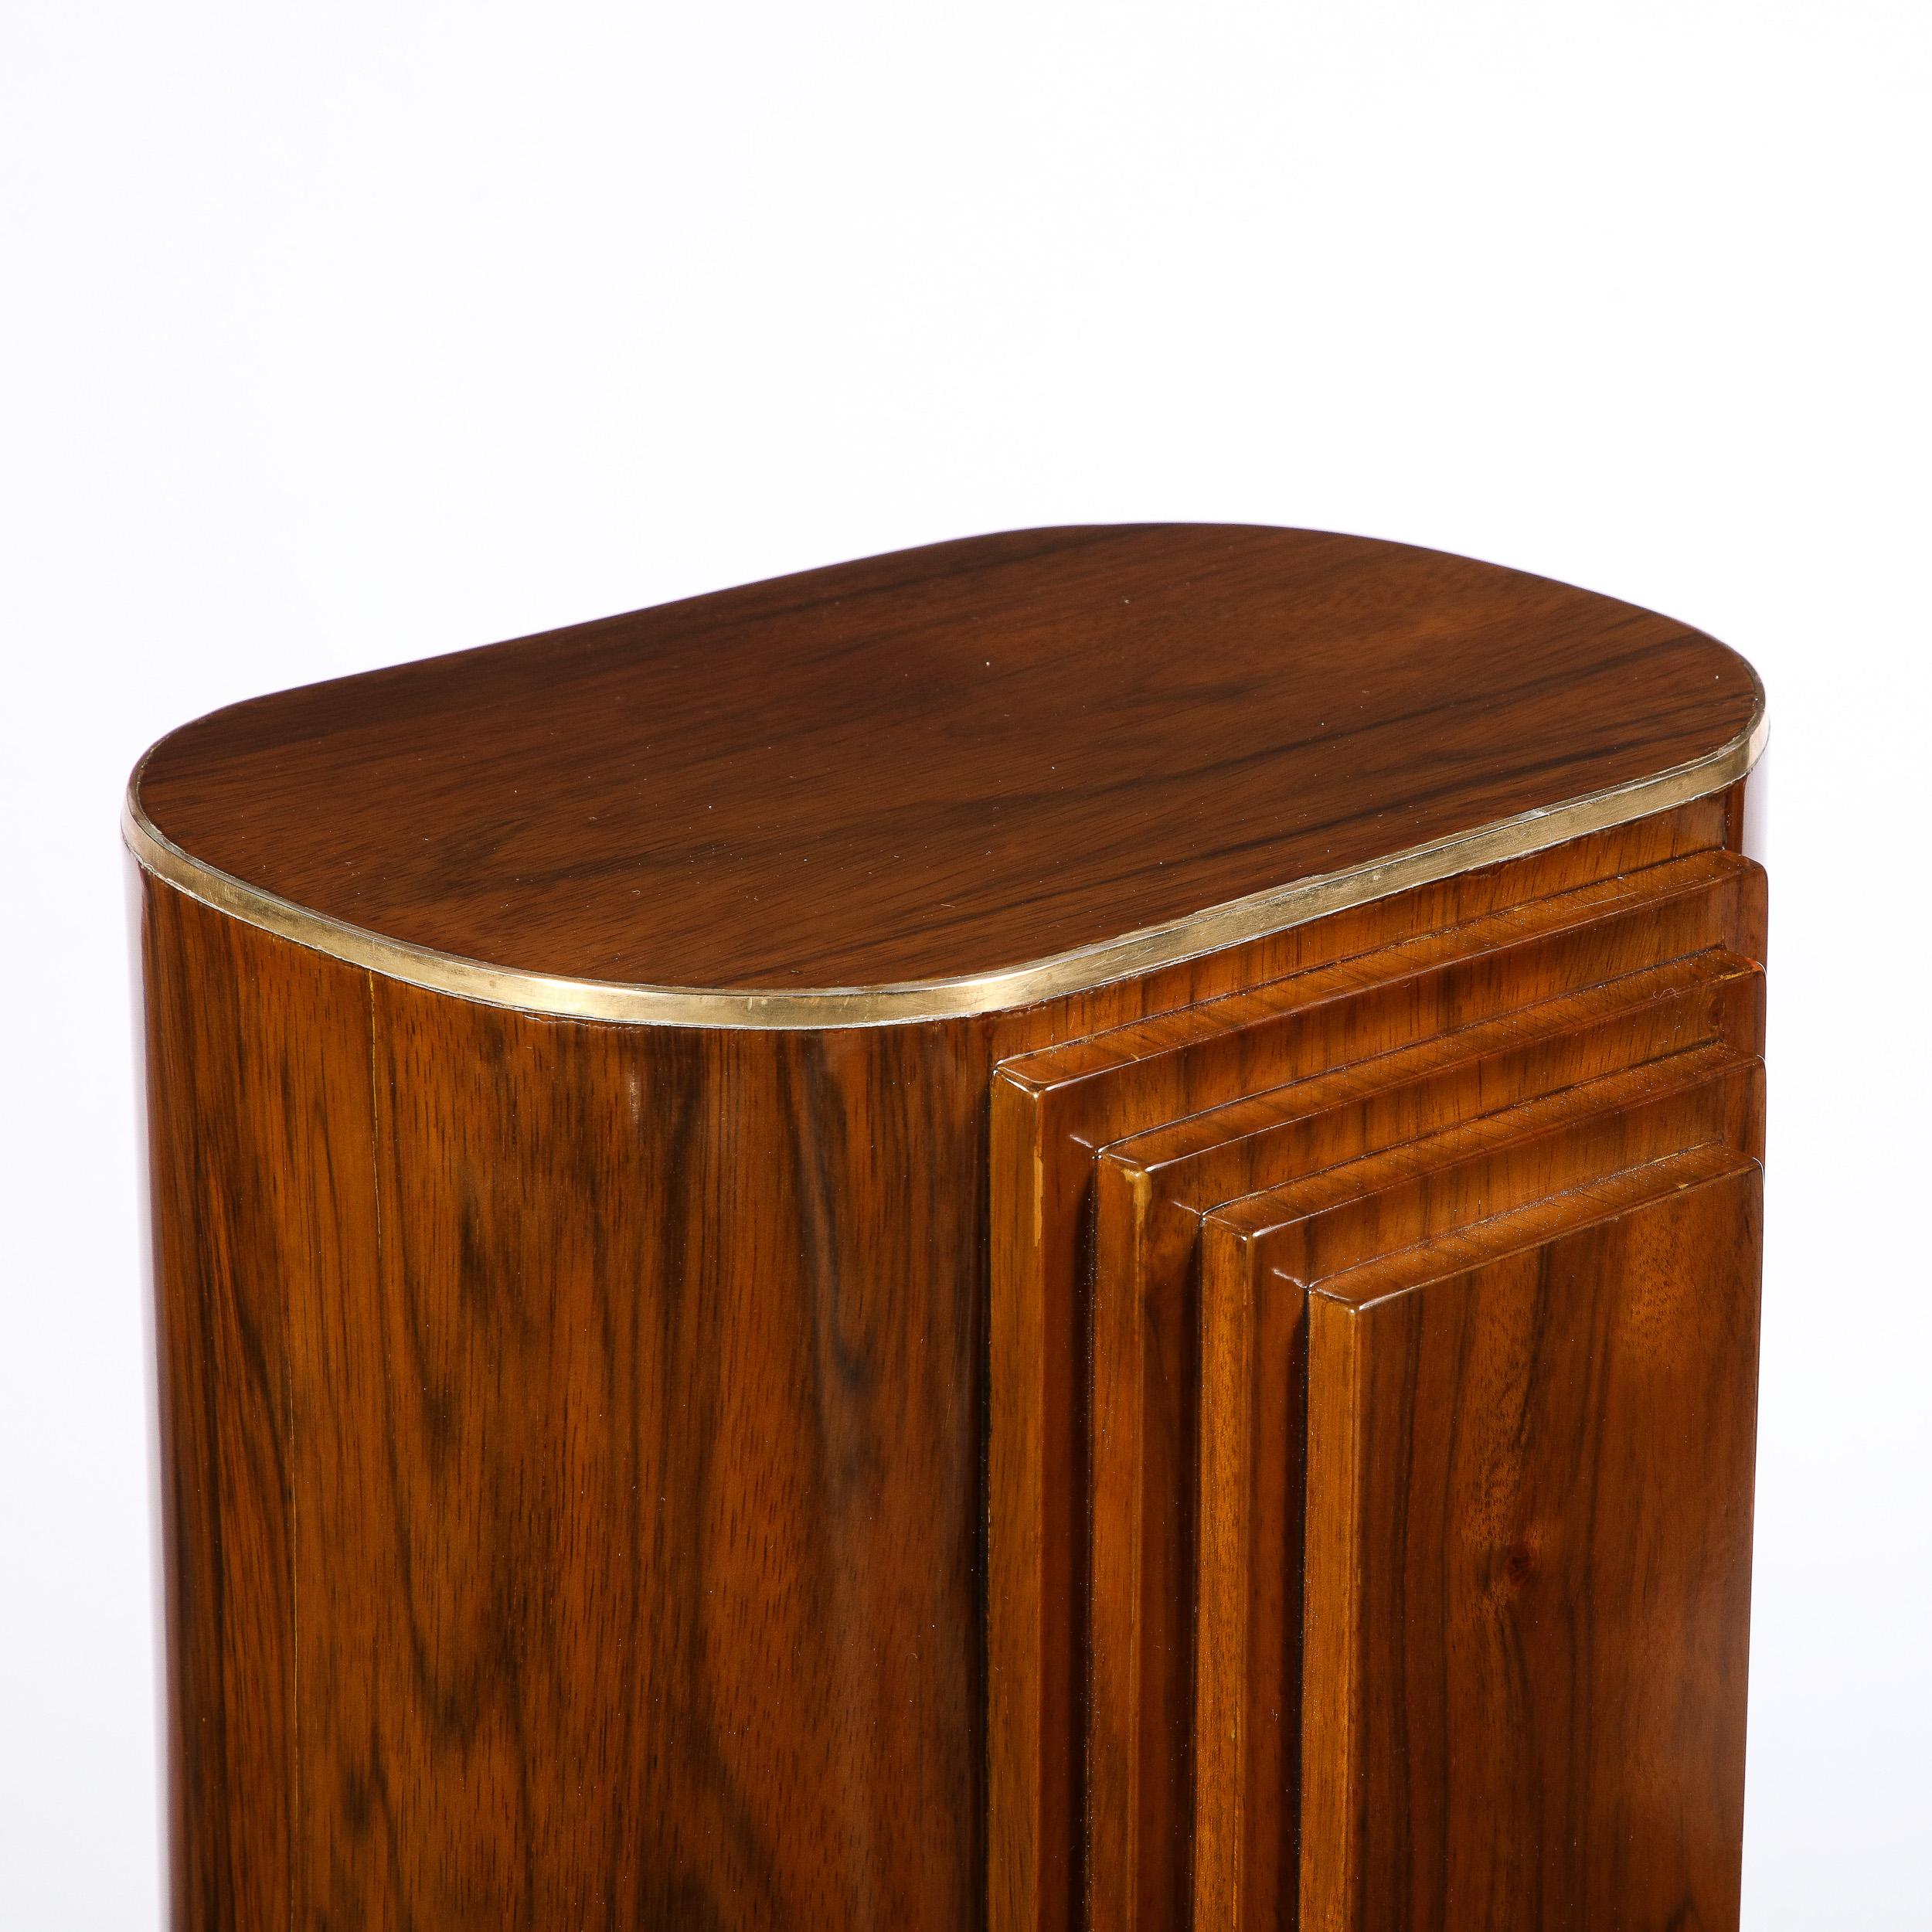 Art Deco Skyscraper Hand-rubbed Book-matched Walnut Pedestal w/ Brass Inlays For Sale 8